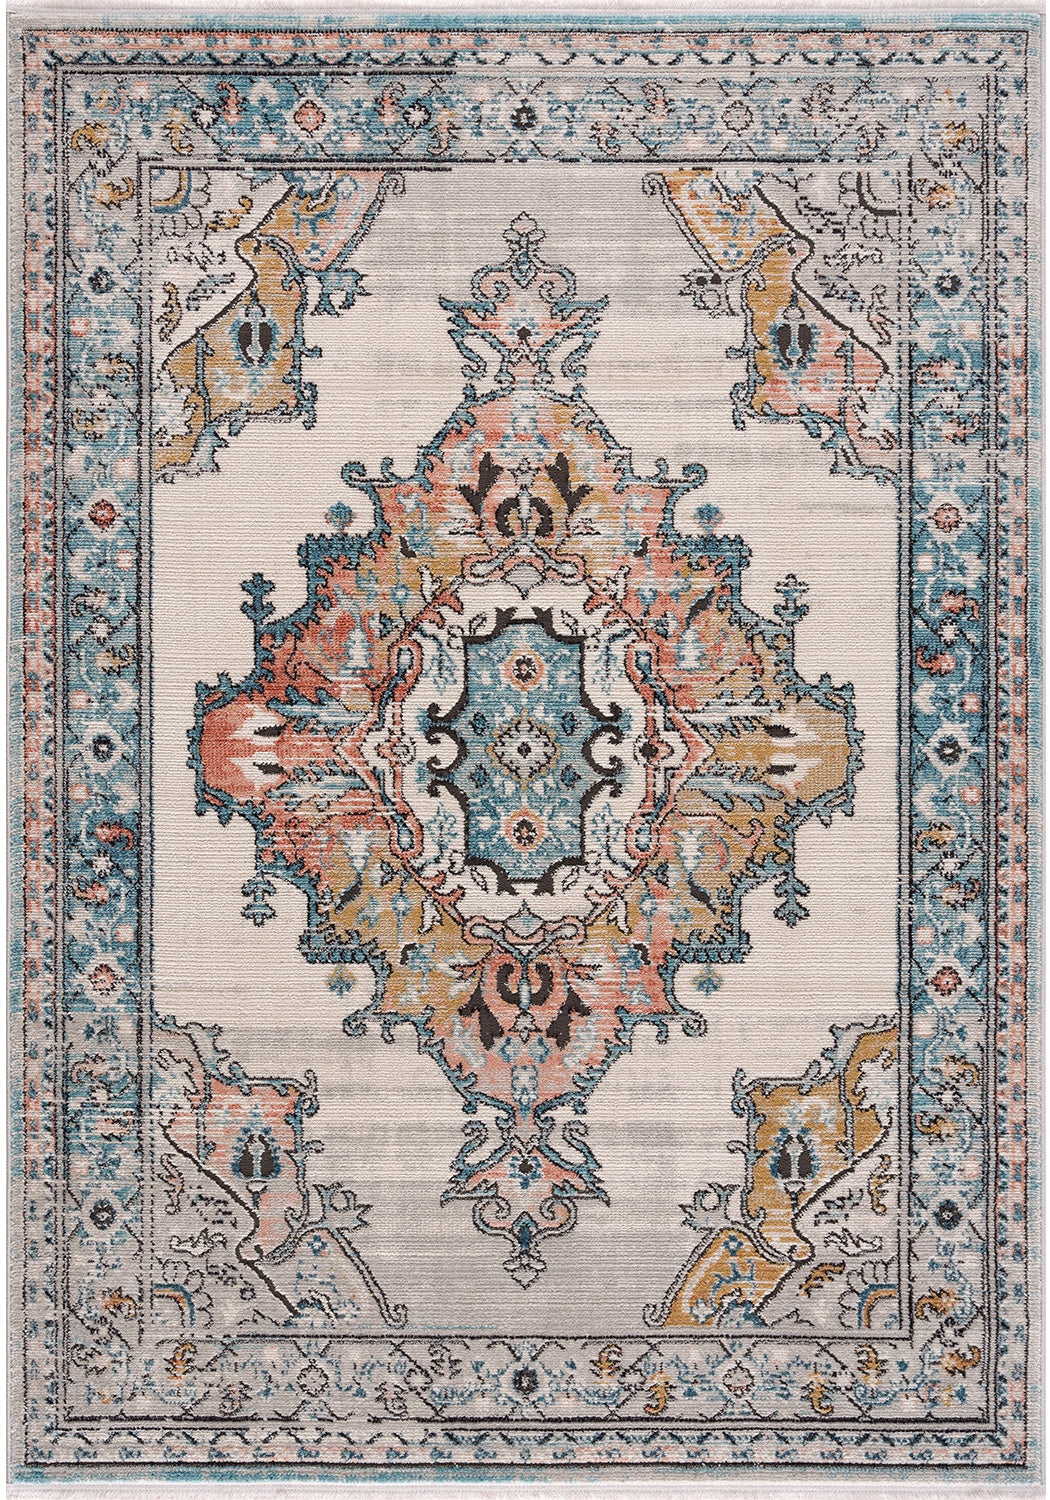 la dole rugs traditional persian bordered ikat turquoise ivory red orange area rug 2x5, 3x5 Runner Rug, Entry Way, Entrance, Balcony, Bedside, Home Office, Table Top